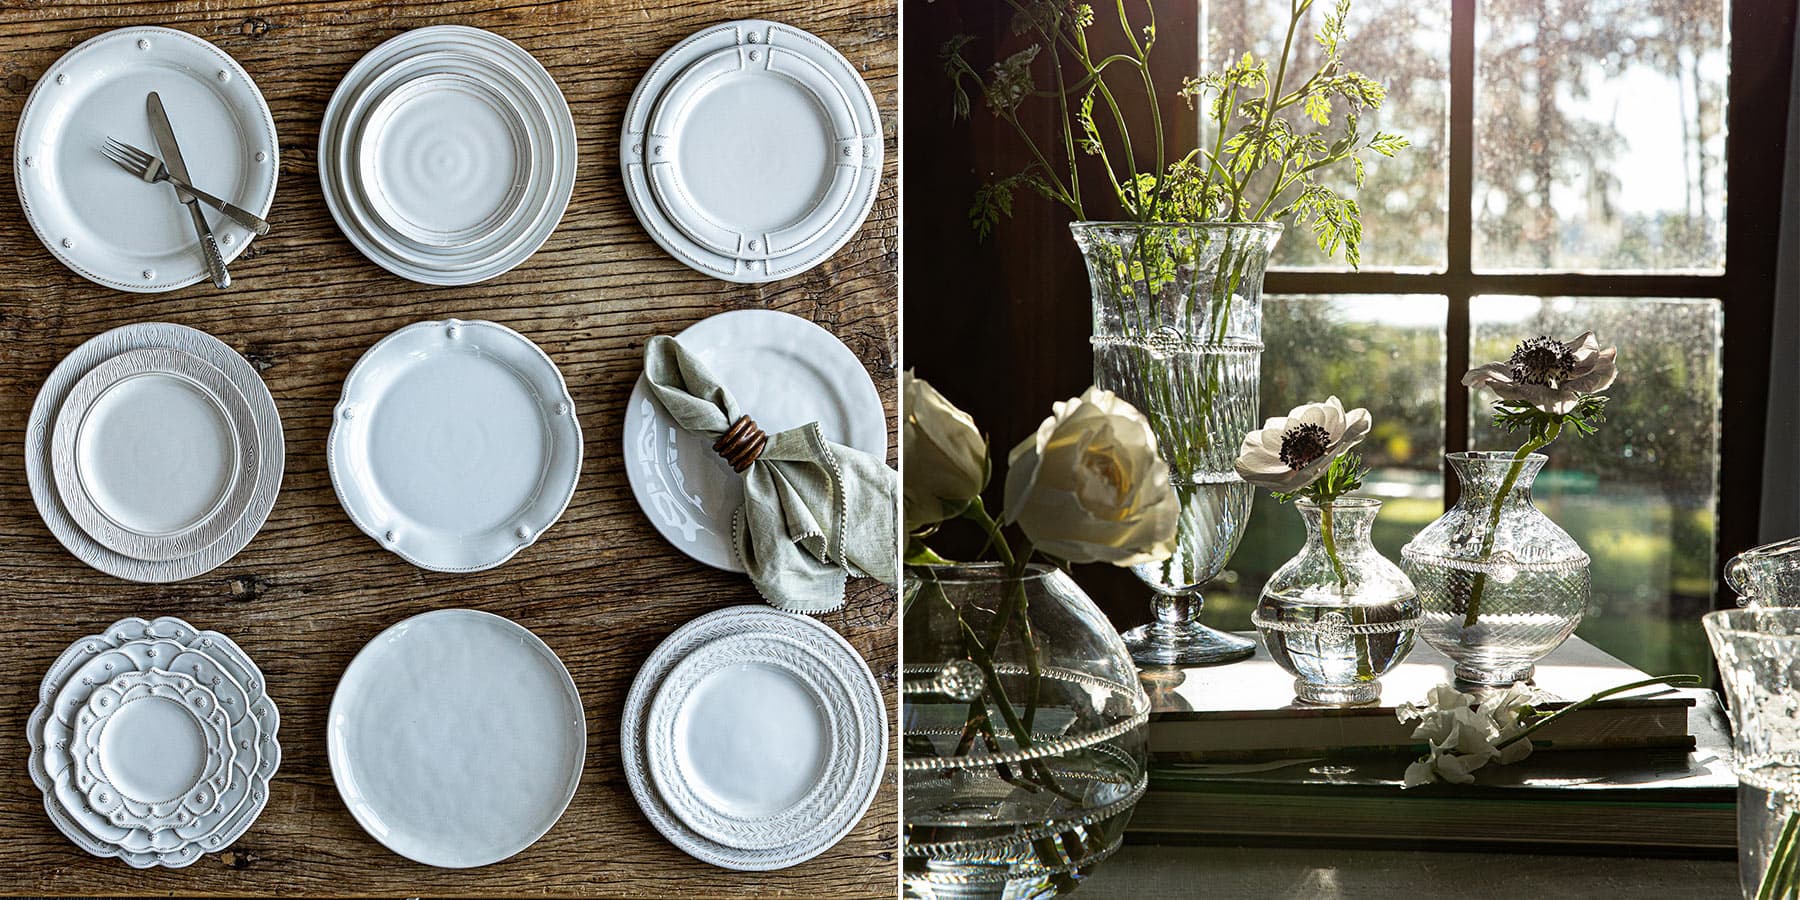 Registries offer a curated list of dinnerware and décor that establish a foundation of everyday essentials for your home